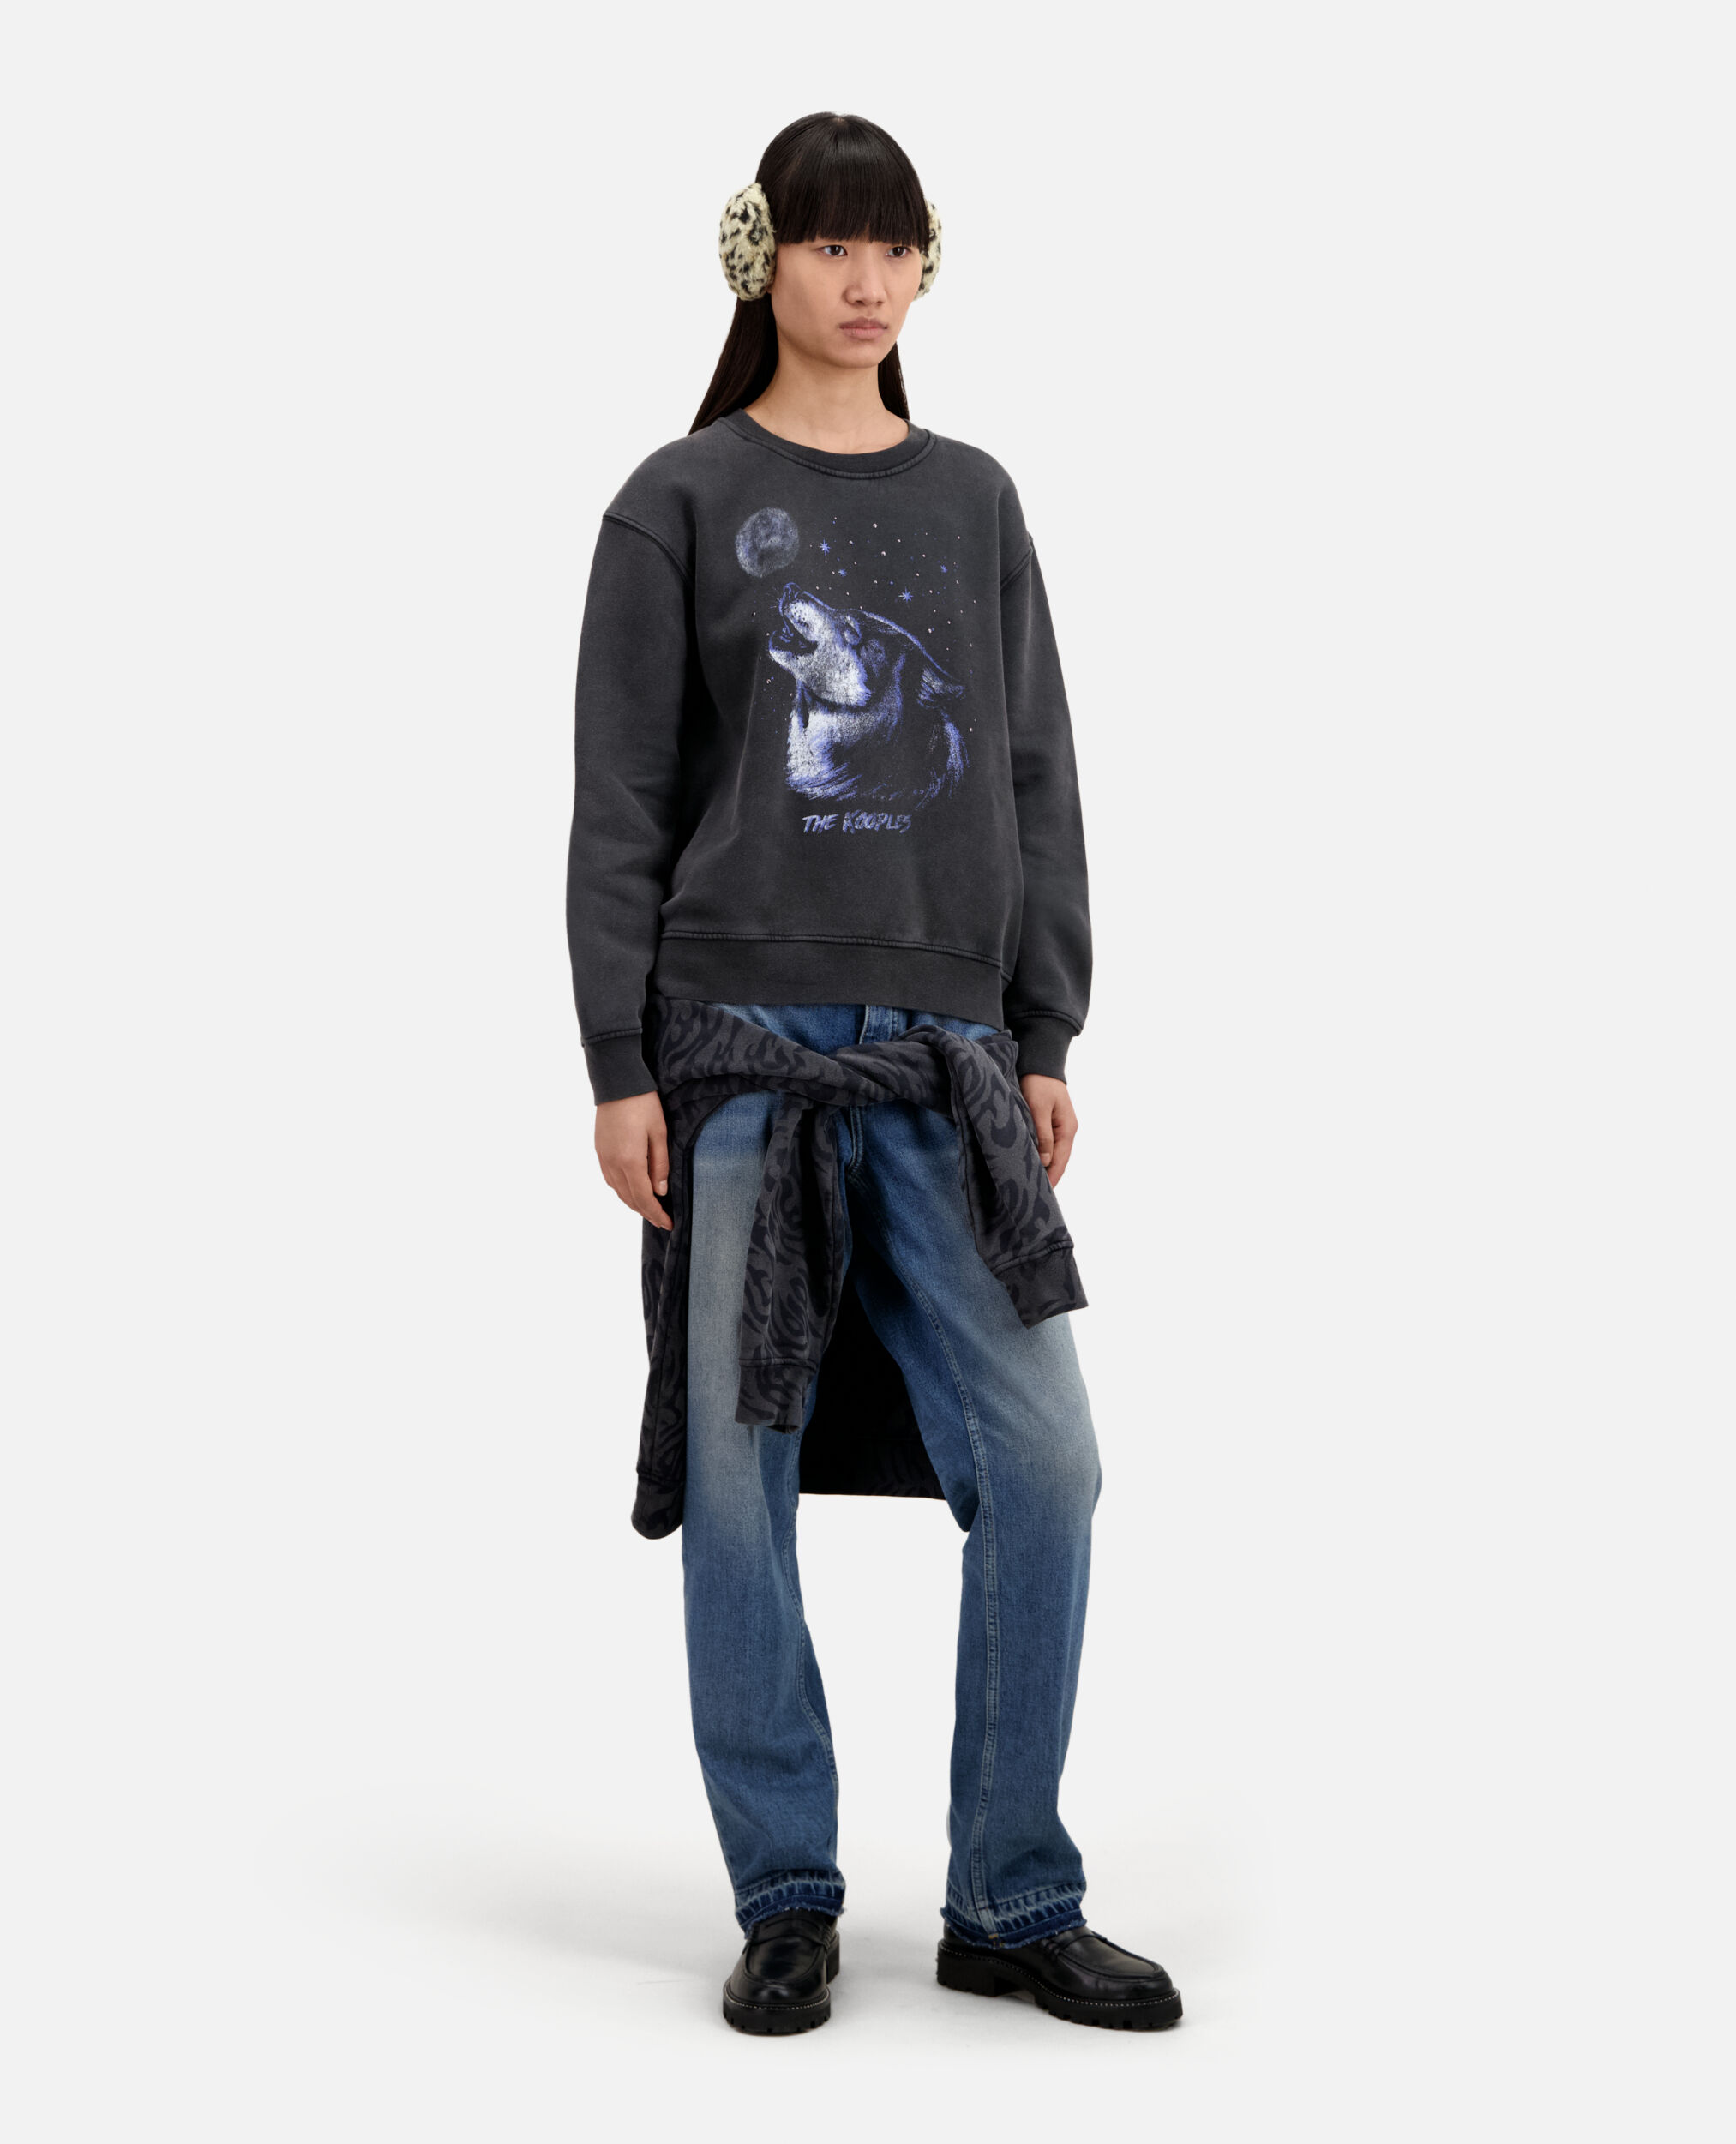 Women's Black sweatshirt with Wolf serigraphy, BLACK WASHED, hi-res image number null